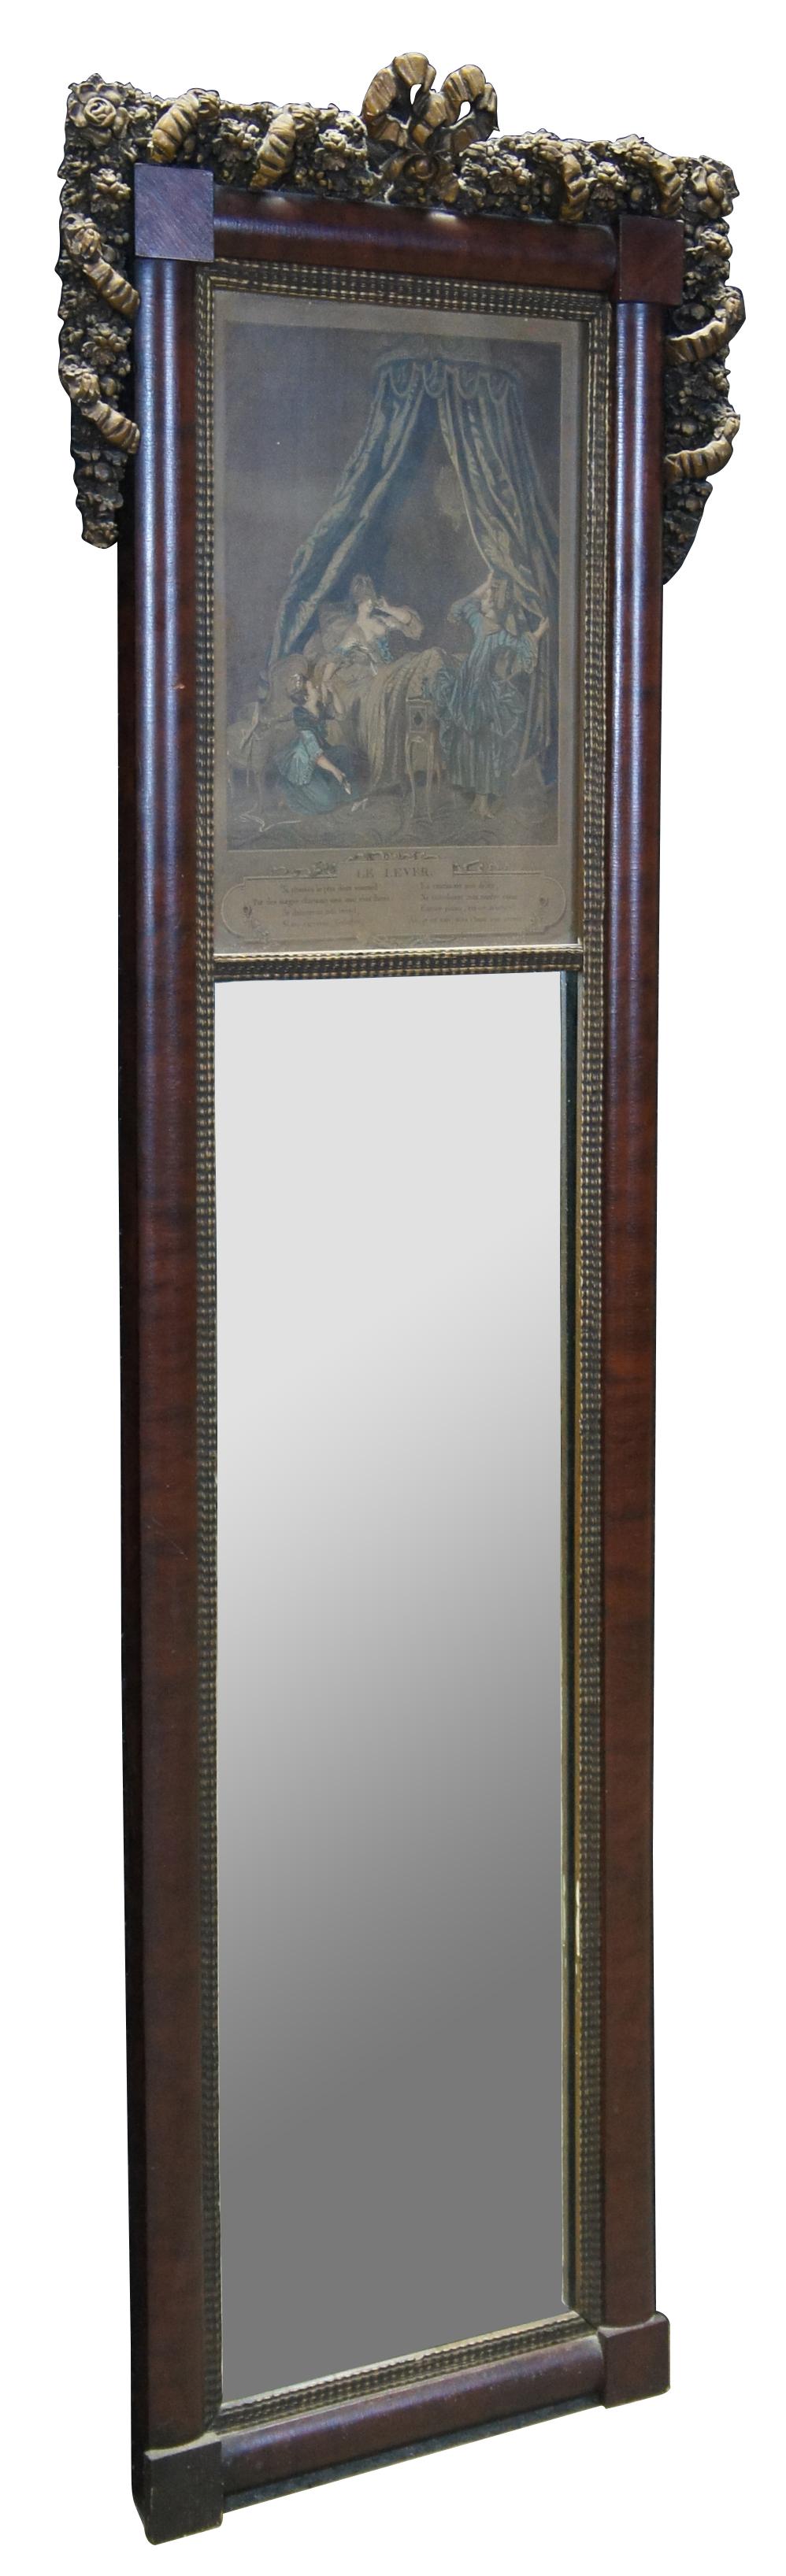 Antique Louis XVI mahogany trumeau wall mirror topped with a 1774 hand colored engraving titled “Le Lever” by Antoine Louis Romanet (1742-1810, French engraver and miniaturist) after Sigmund Freudenberger. “Sigmund Freudenberger (16 June 1745 – 15